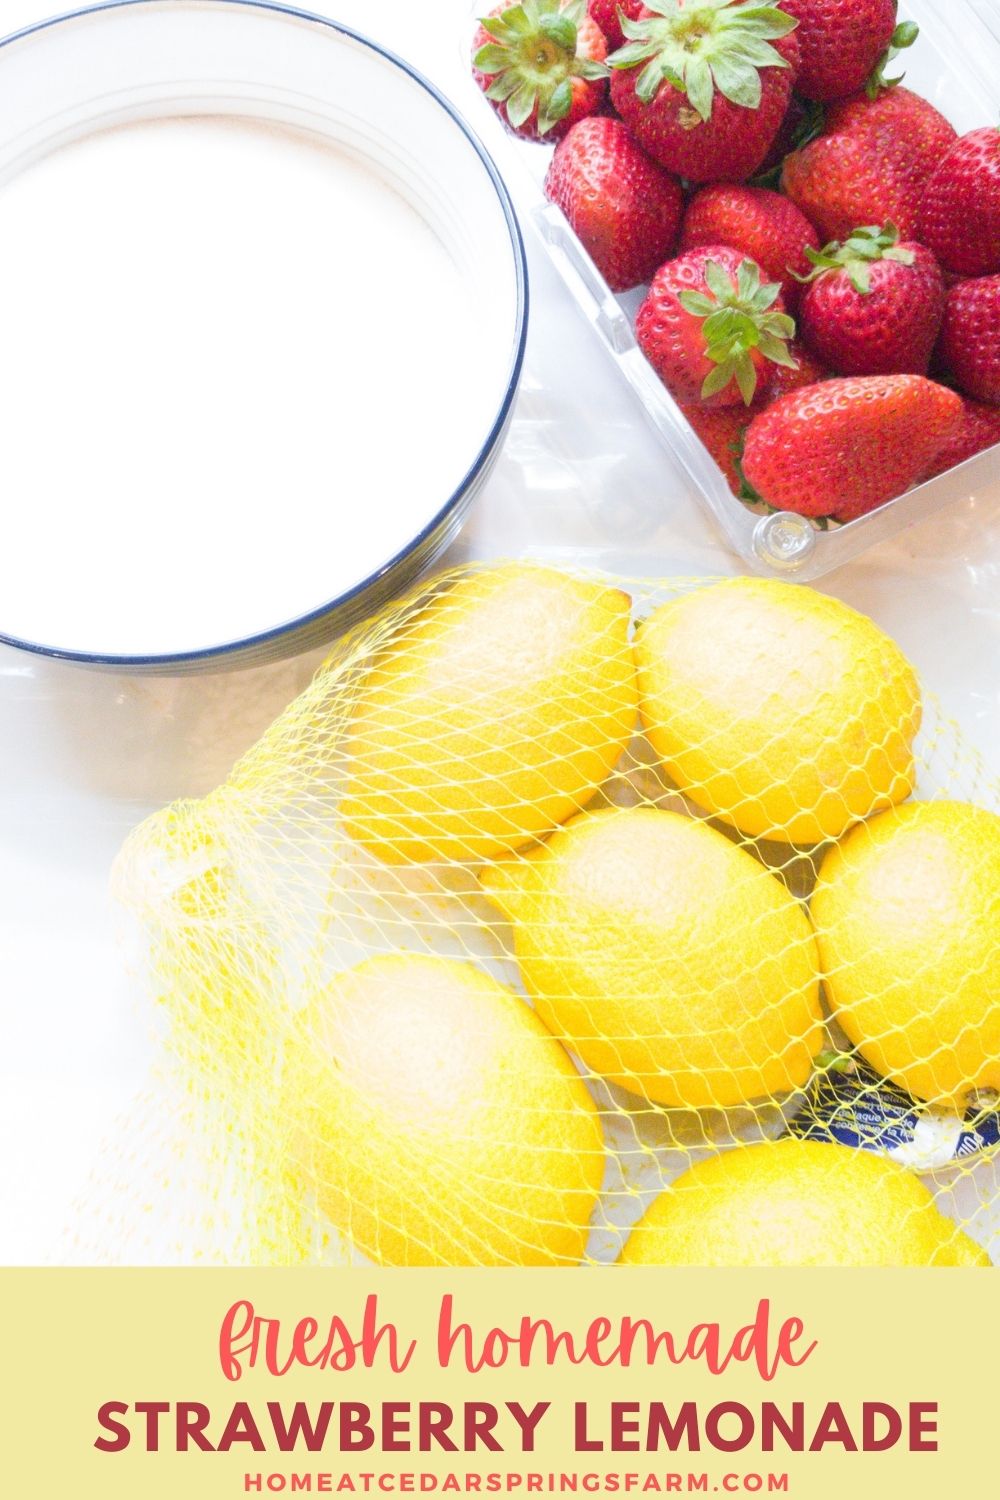 picture of strawberry lemonade ingredients with text overlay